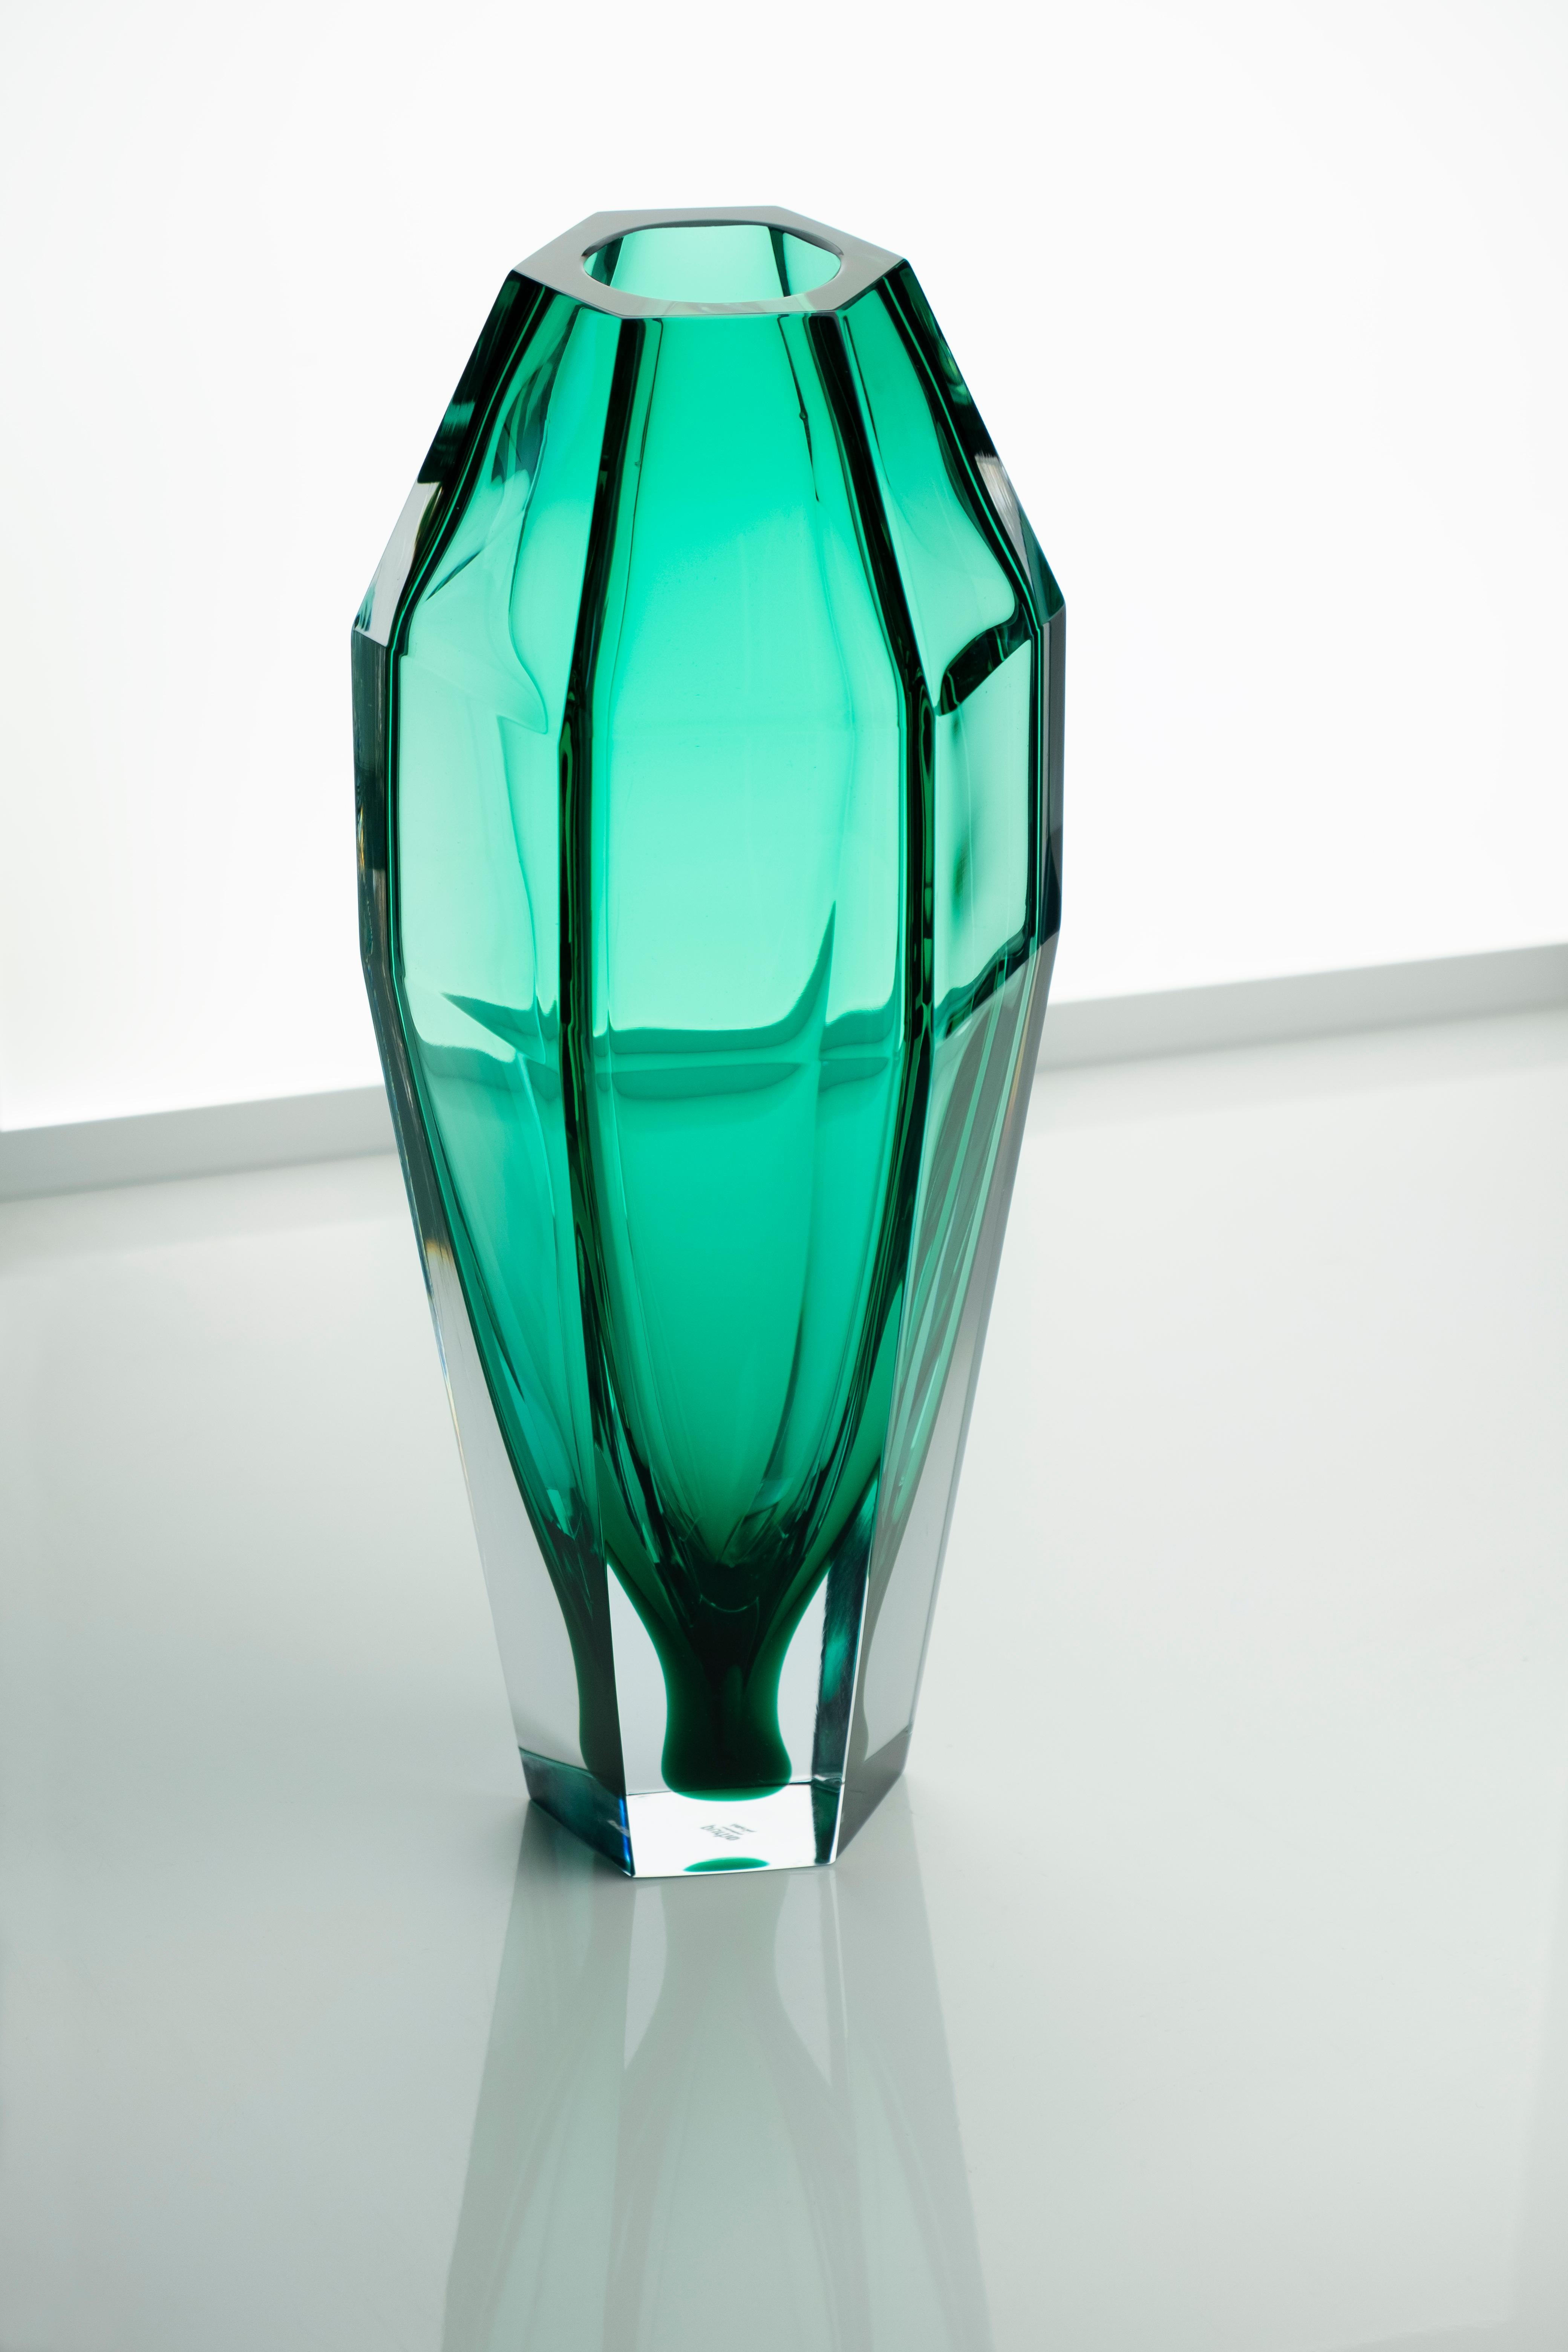 21st century Alessandro Mendini, GEMELLO transparent vase, Murano glass.
Purho continues to search for products with complementary shapes with the pair of Gemello and Gemella vases designed by Alessandro Mendini. Sharing the same design concept,